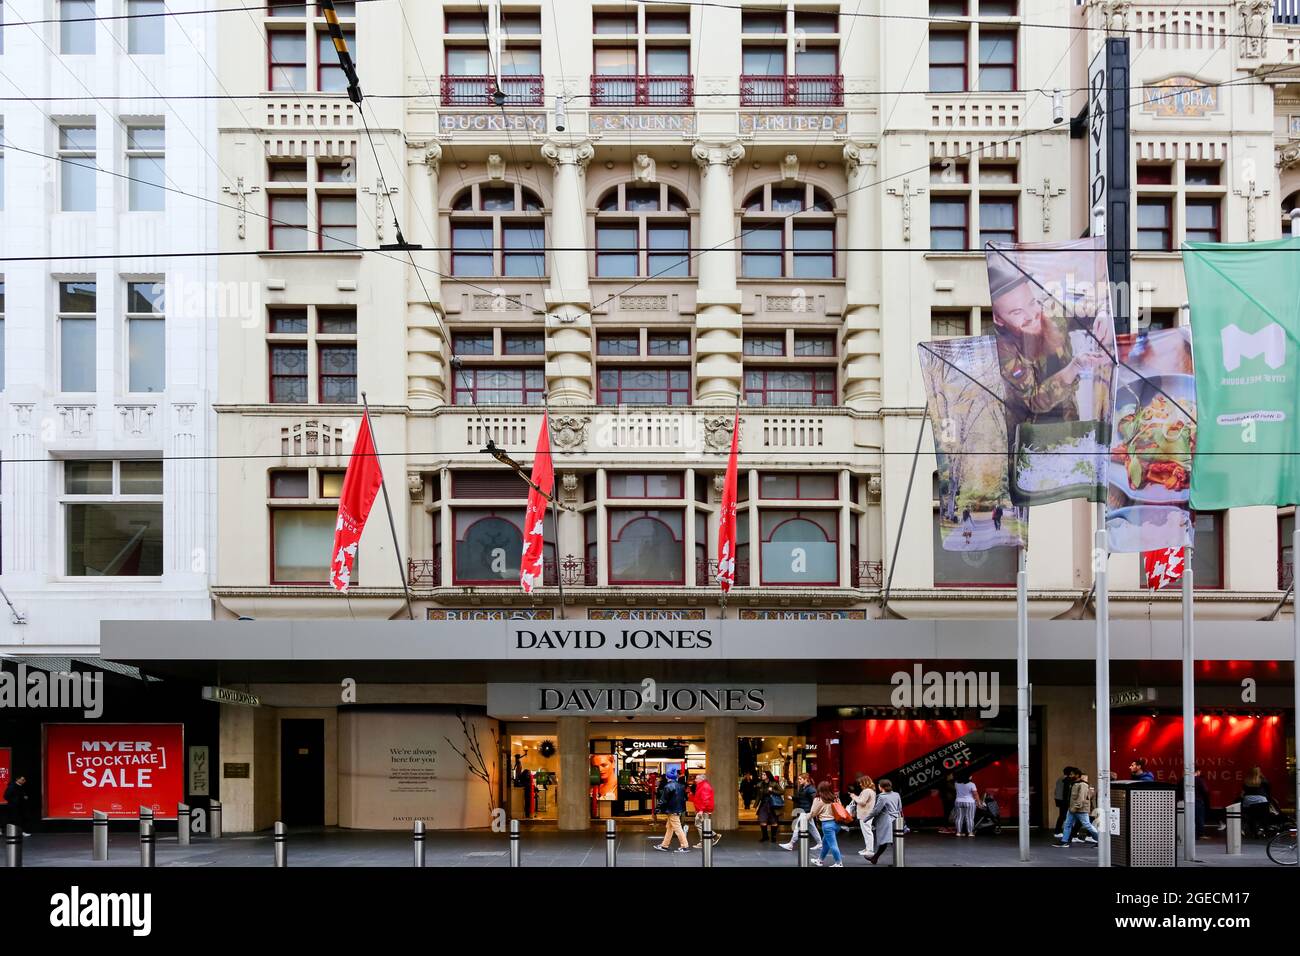 Melbourne, Australia, 21 June, 2020. MELBOURNE, AUSTRALIA - June 21: A view of the main entrance of David Jones Department Store in Bourke Street as restrictions are being tightened in Victoria during COVID 19 on 21 June, 2020 in Melbourne, Australia. One of Australia's largest insurers will no longer provide cover for suppliers of struggling retailers Myer and David Jones after deeming the traditional department store sector too risky to insure. In a letter from QBE Insurance to Suppliers, the $13.5 billion insurer said it would no longer provide trade credit insurance for Myer or David Jones Stock Photo